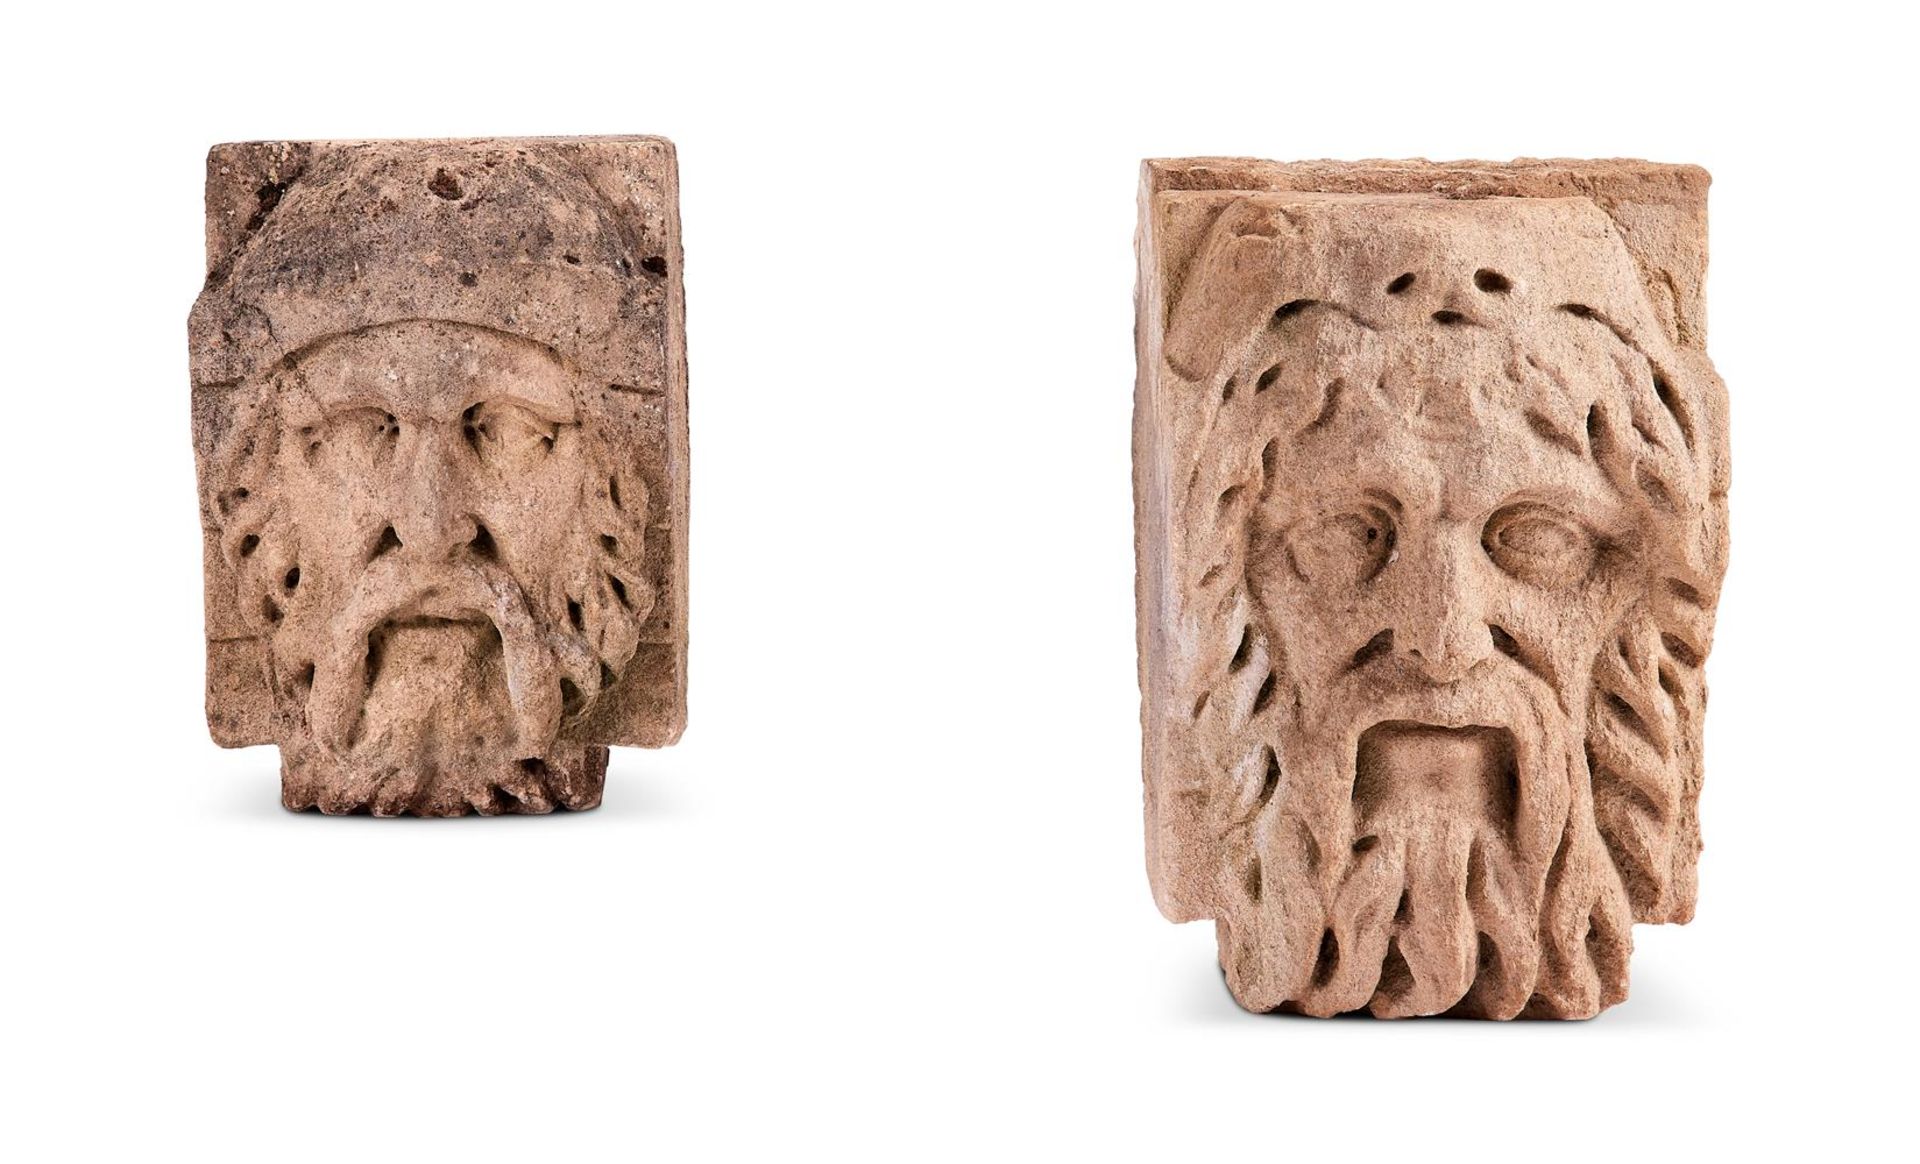 A PAIR OF CARVED COTSWOLD STONE HEADS, 18TH CENTURY